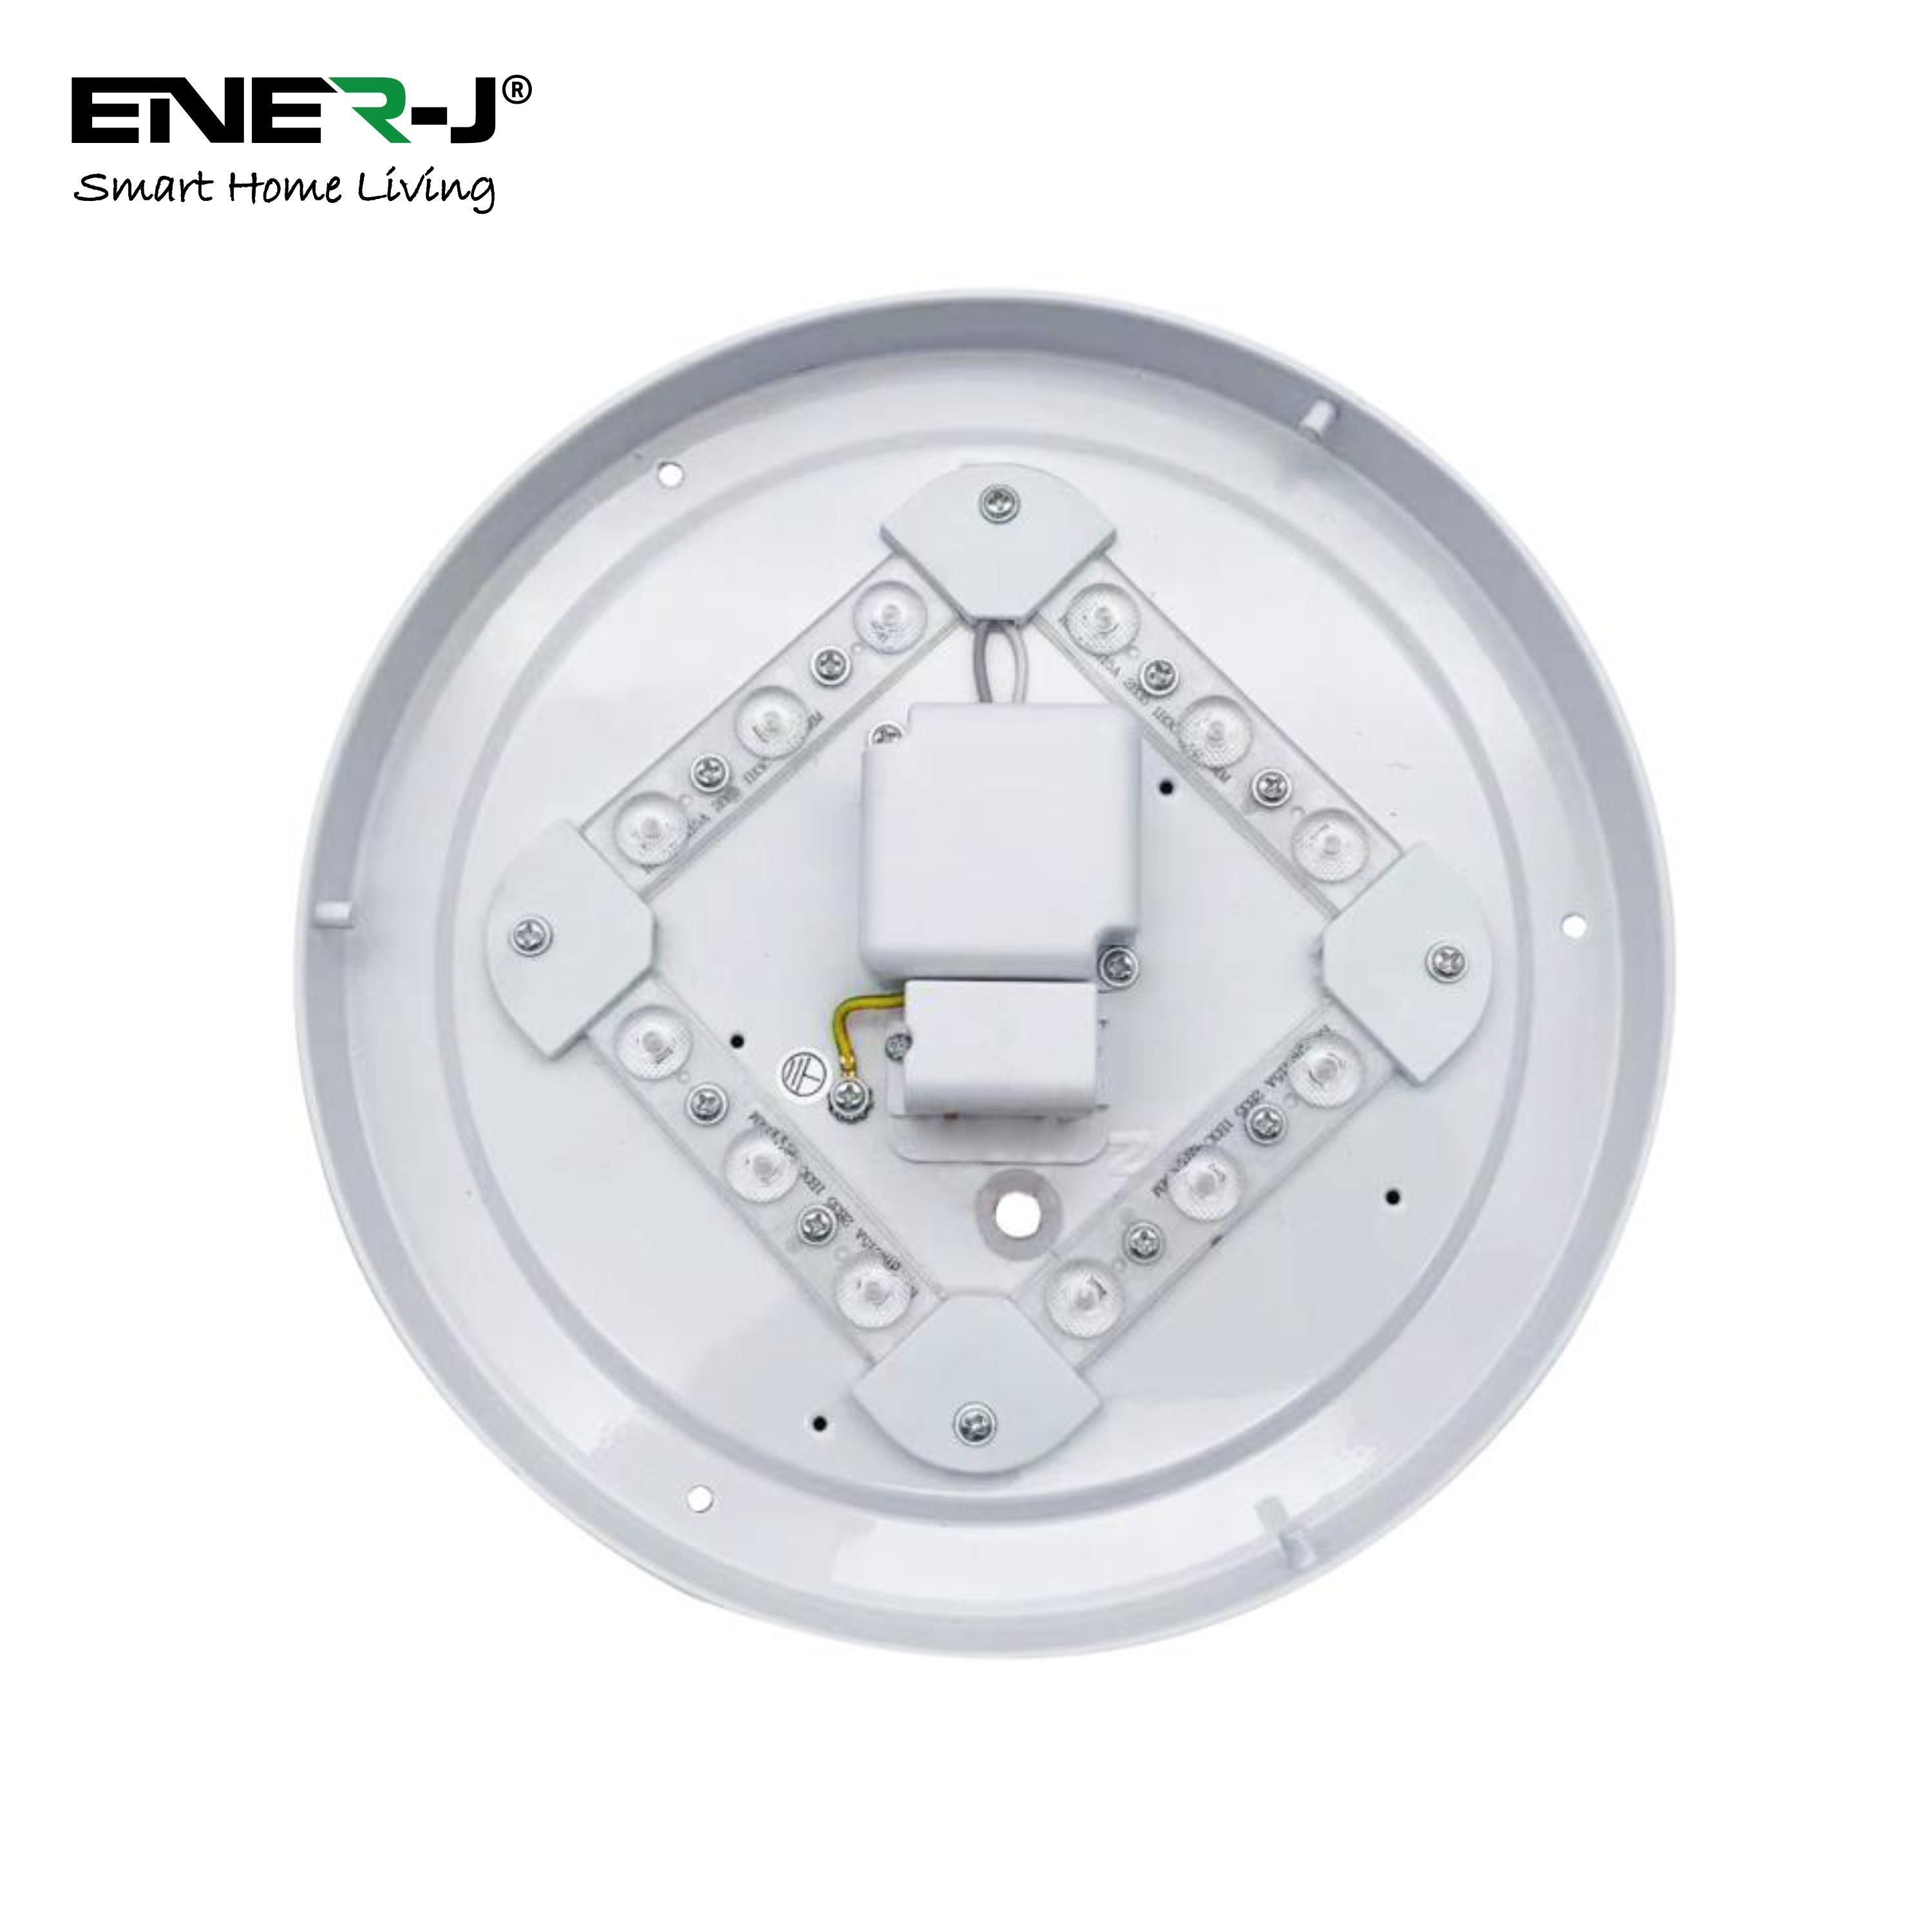 12W Ceiling Light With Microwave Sensor 960 Lumens CCT Changeable Warm White to Cool White, 250*55mm IP44 With Quick Connector